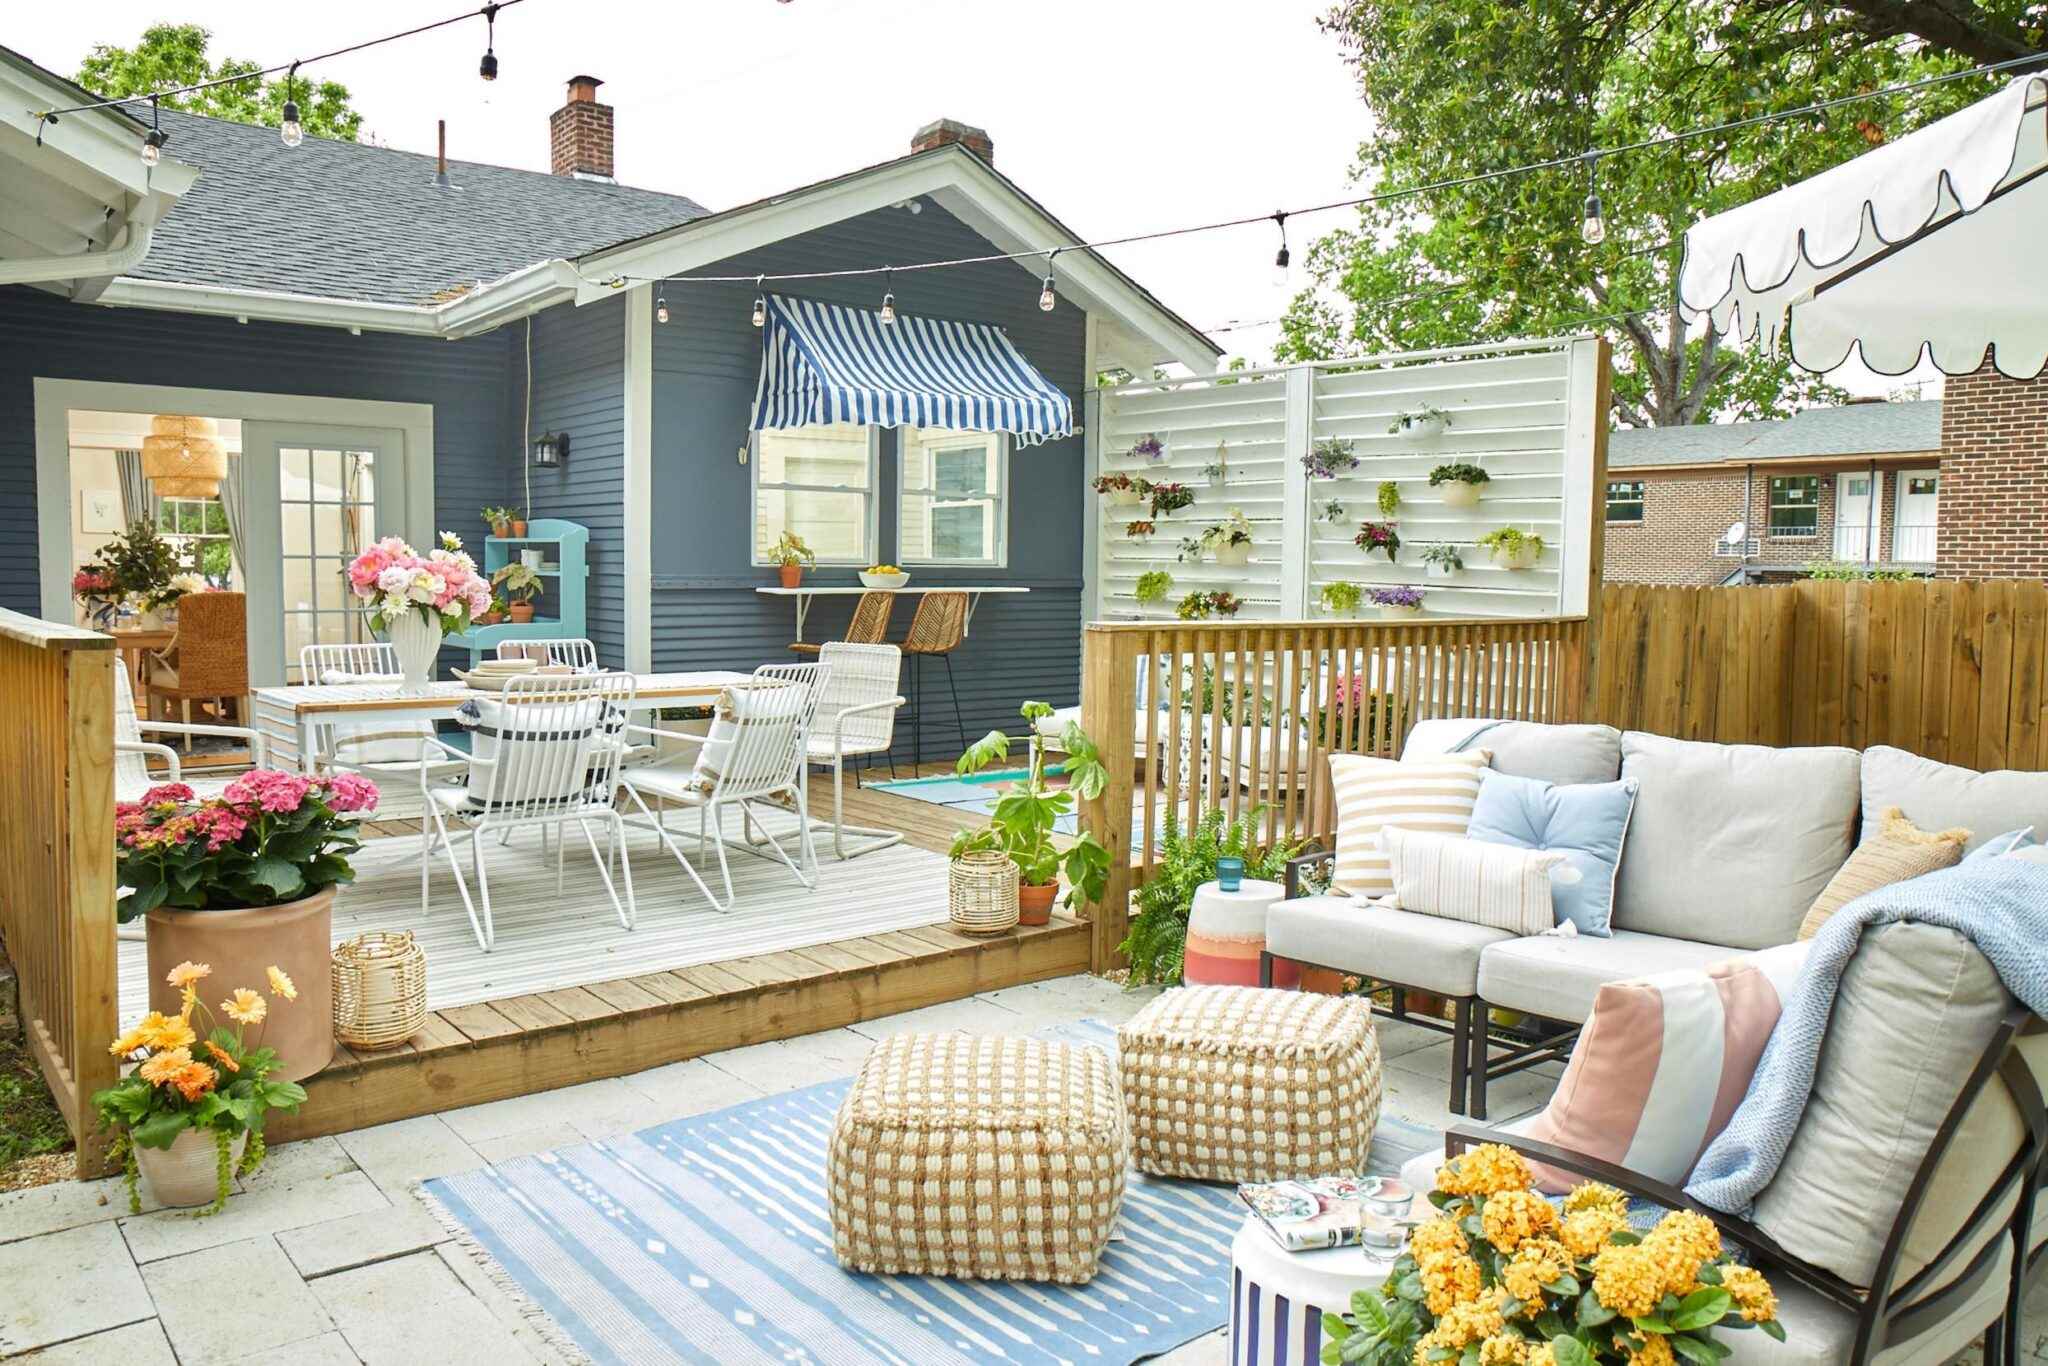 How To Decorate A Backyard